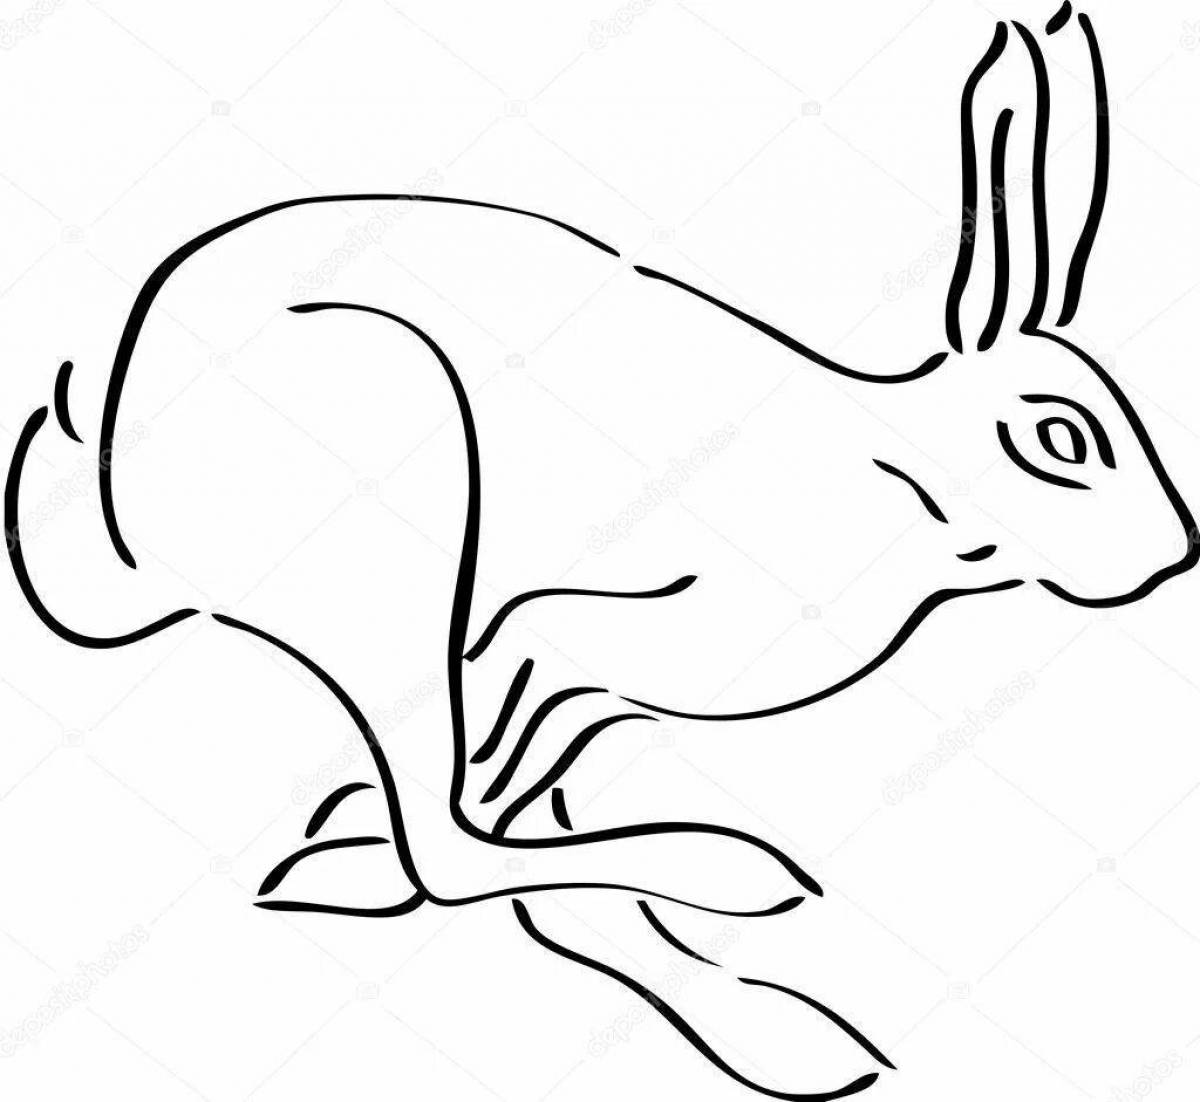 Coloring book shiny running hare